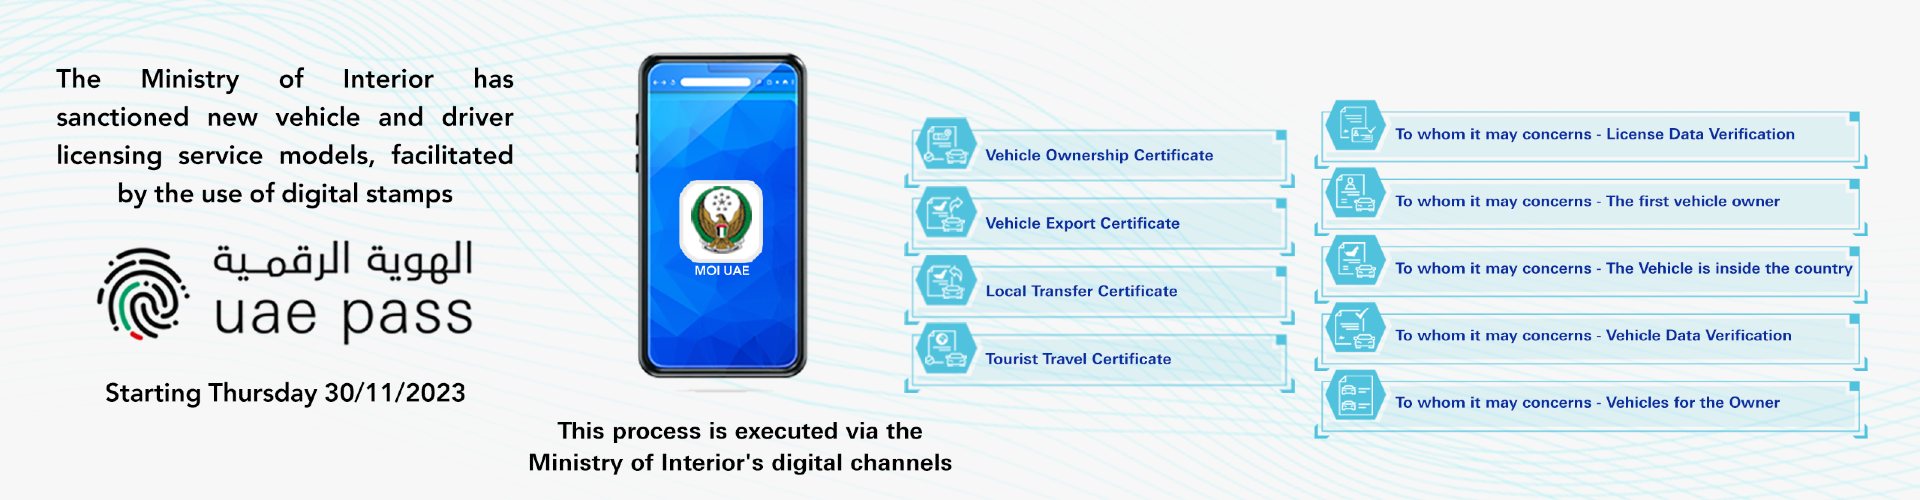 New vehicle and driver licensing service module